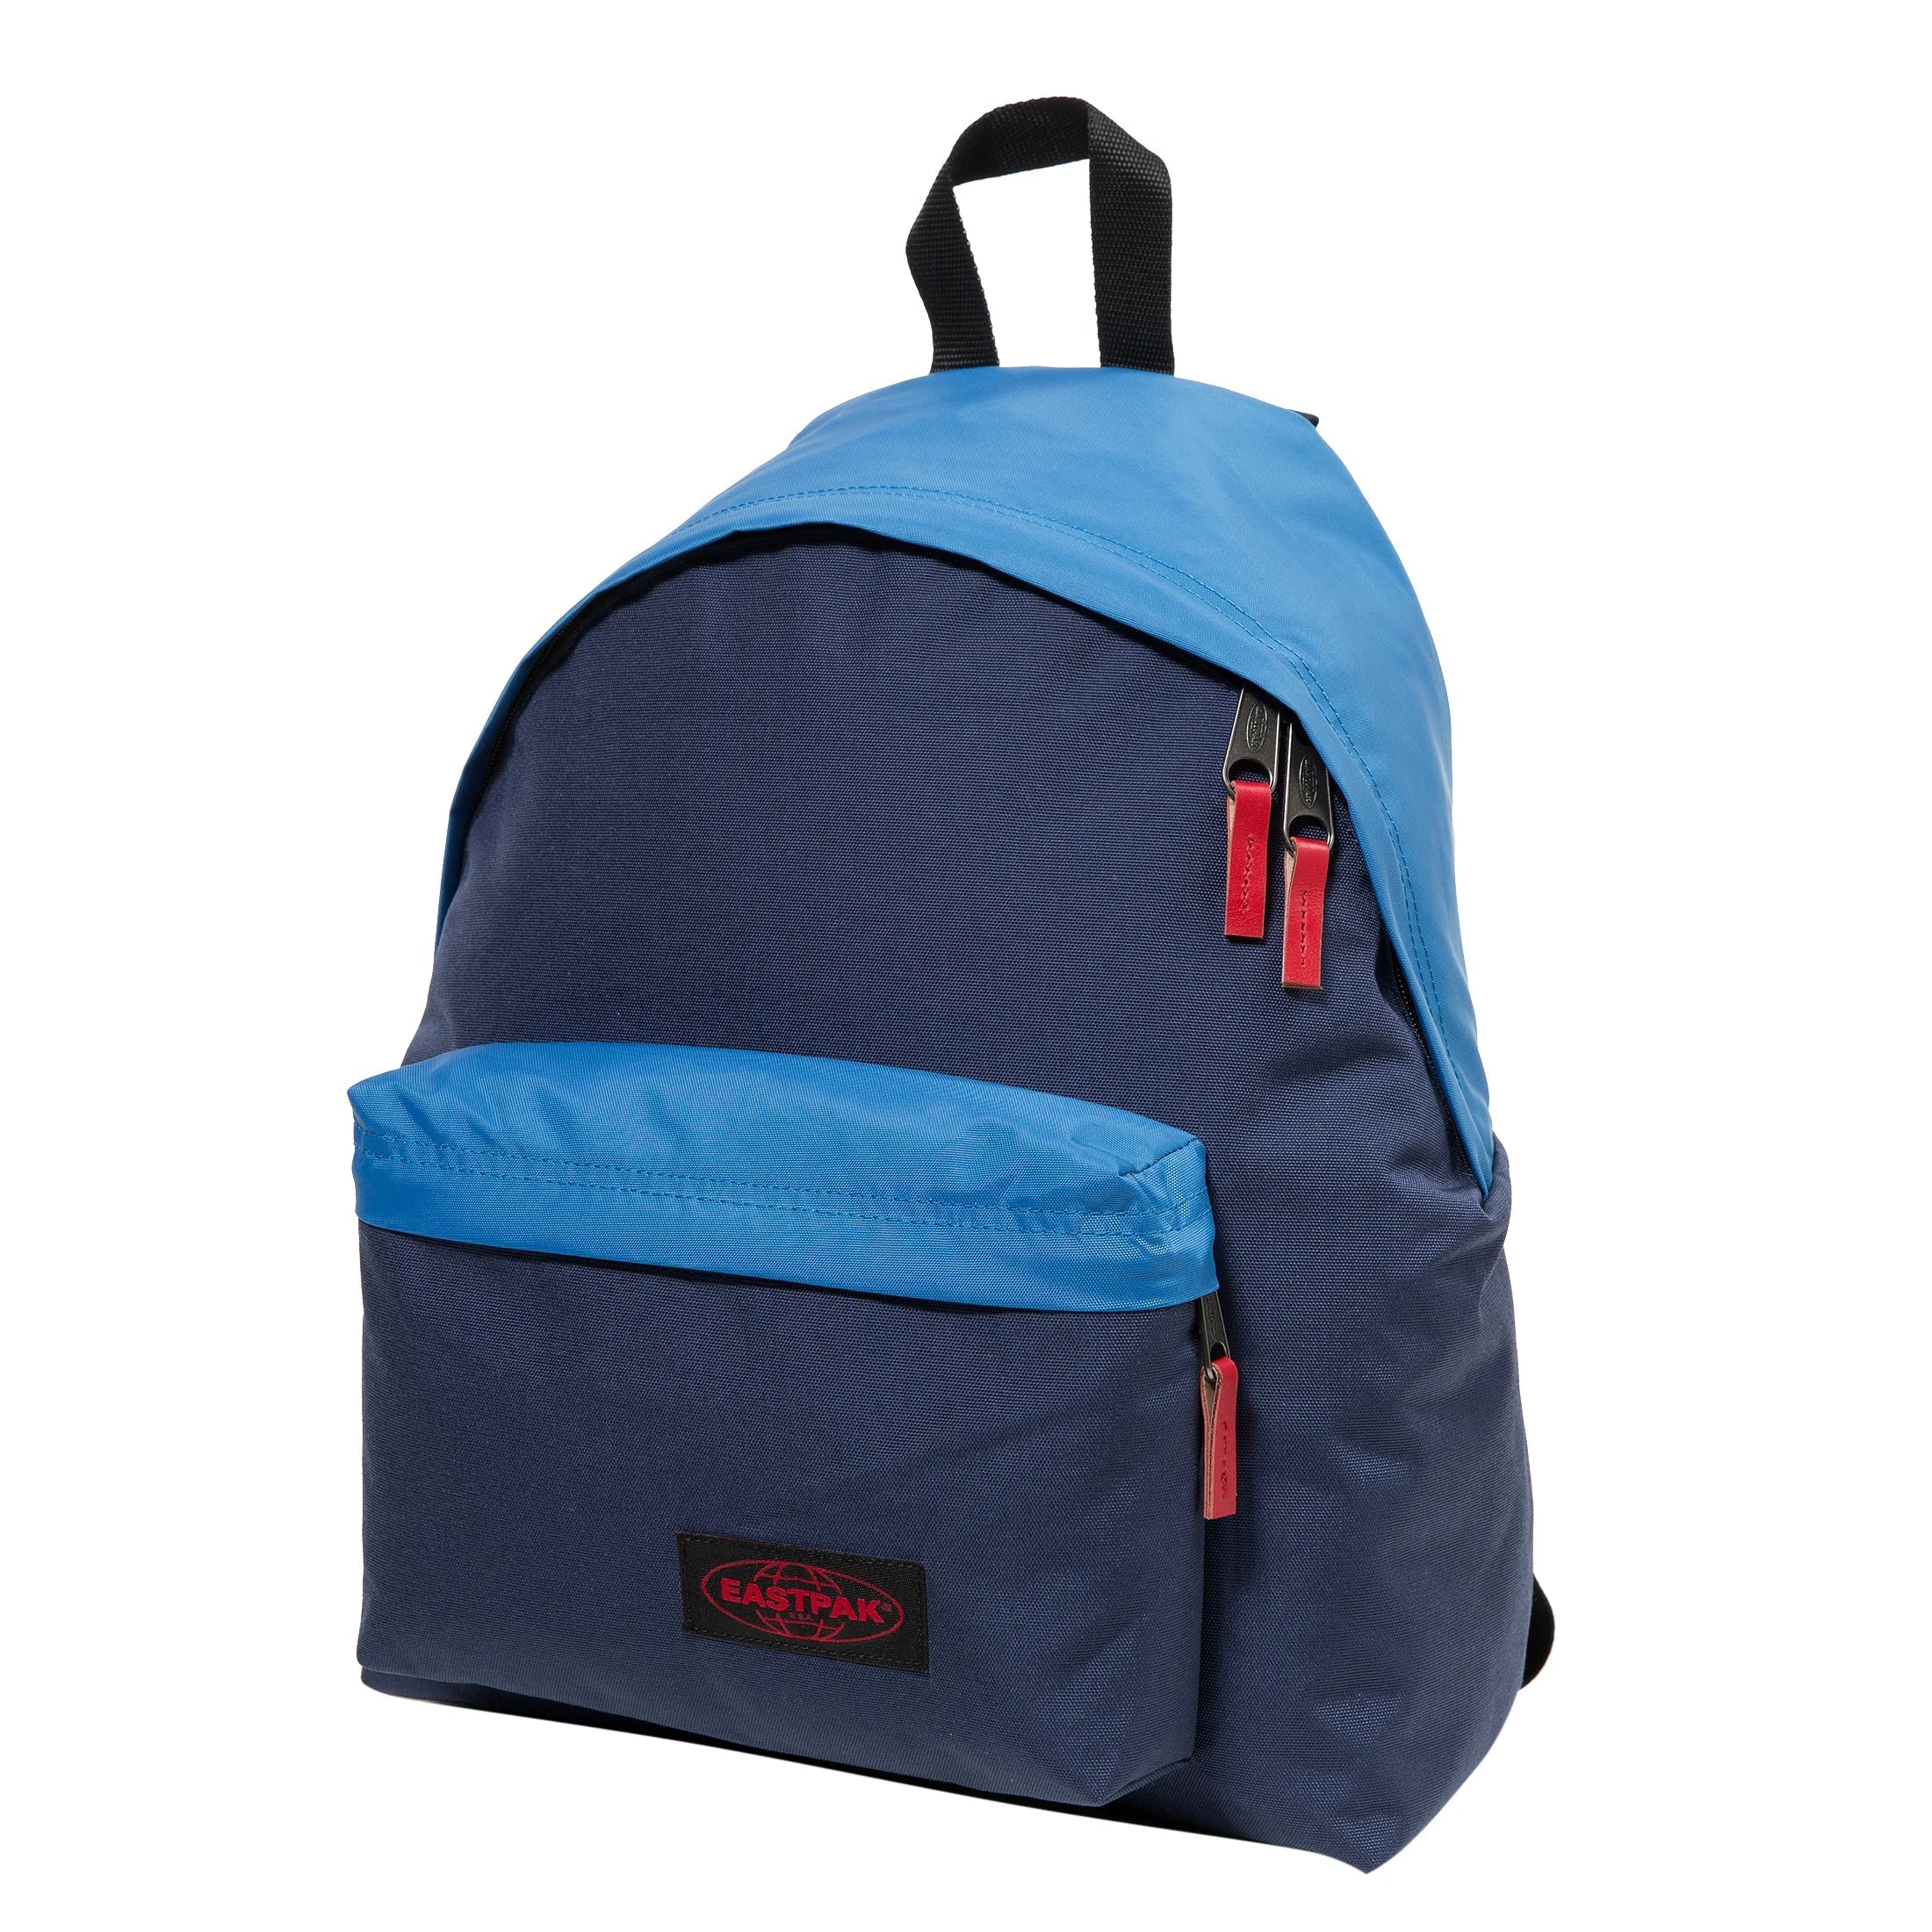 Eastpak Authentic Padded Pak'r leisure backpack 41 cm - combo blue